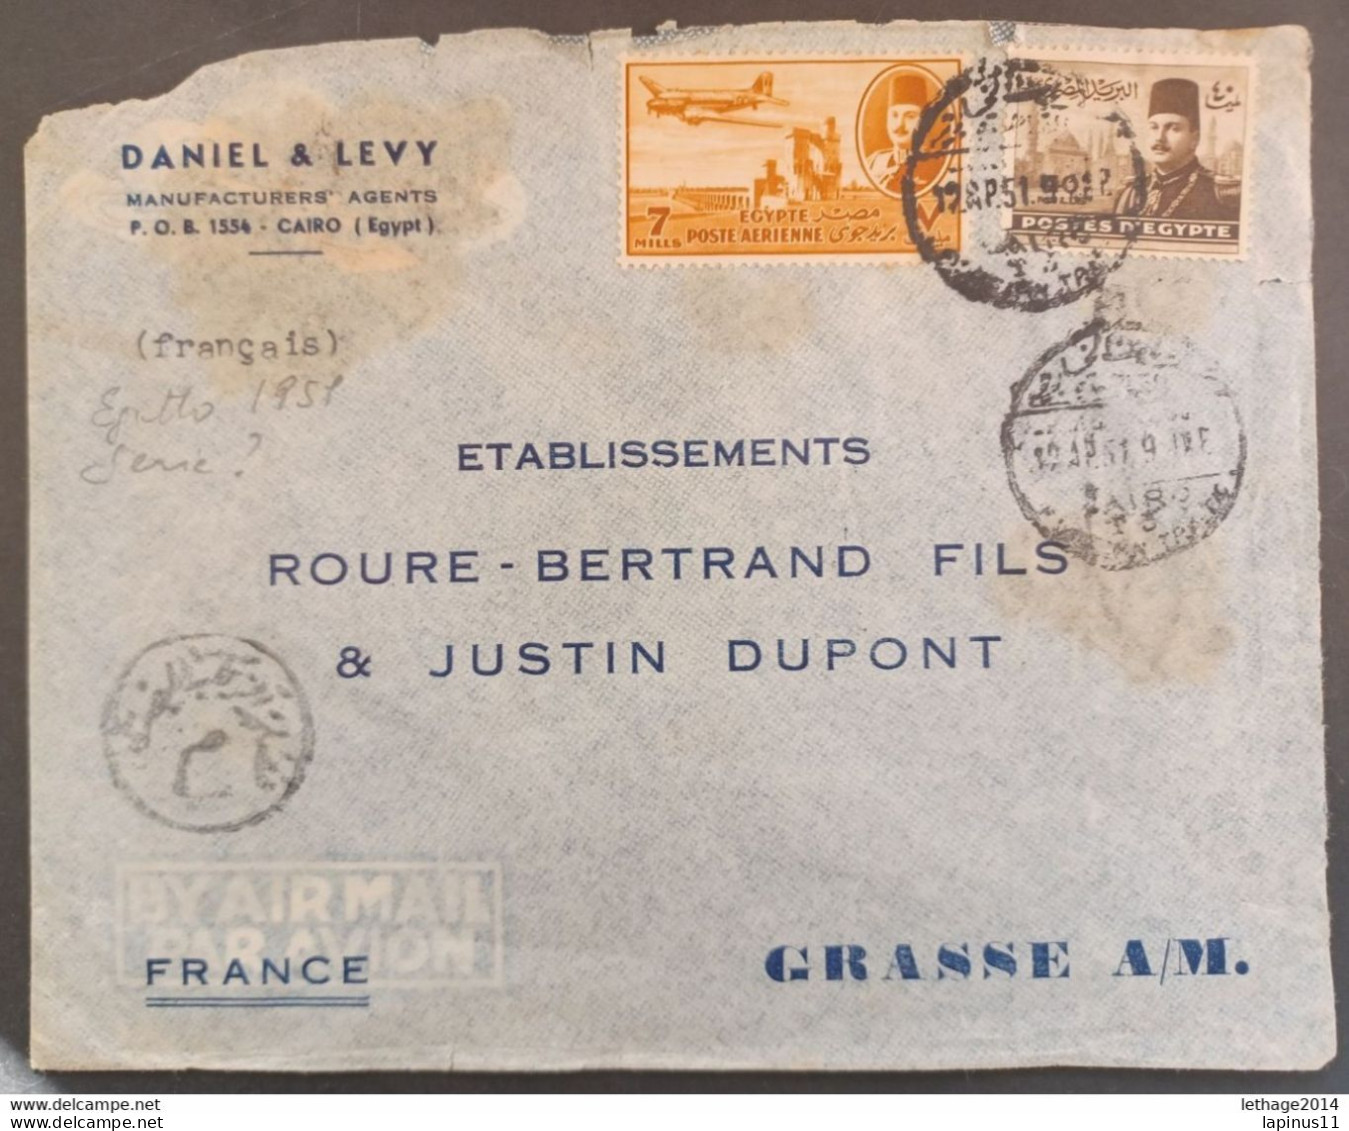 EGYPT مصر EGITTO 1951 KING FUAD COVER ETABLYSSMENTS FINANCIAL CAIRO TO GRASSE FRANCE - Aéreo